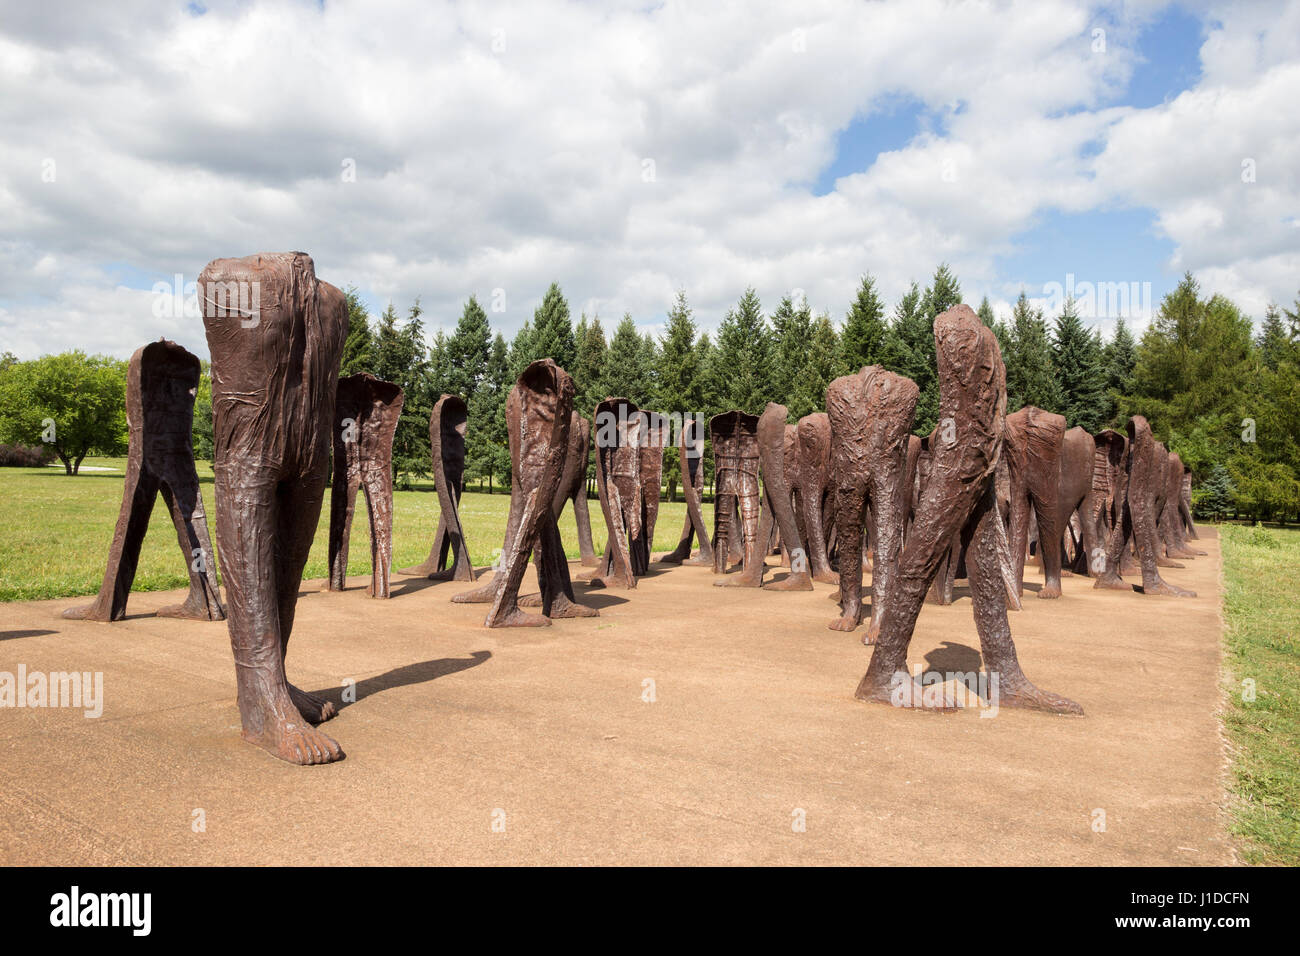 POZNAN, POLAND - AUG 20, 2014: Iron 2 meter tall headless figures marching aimlessly across the Citadel Park in Poznan. The monument is called Unrecog Stock Photo